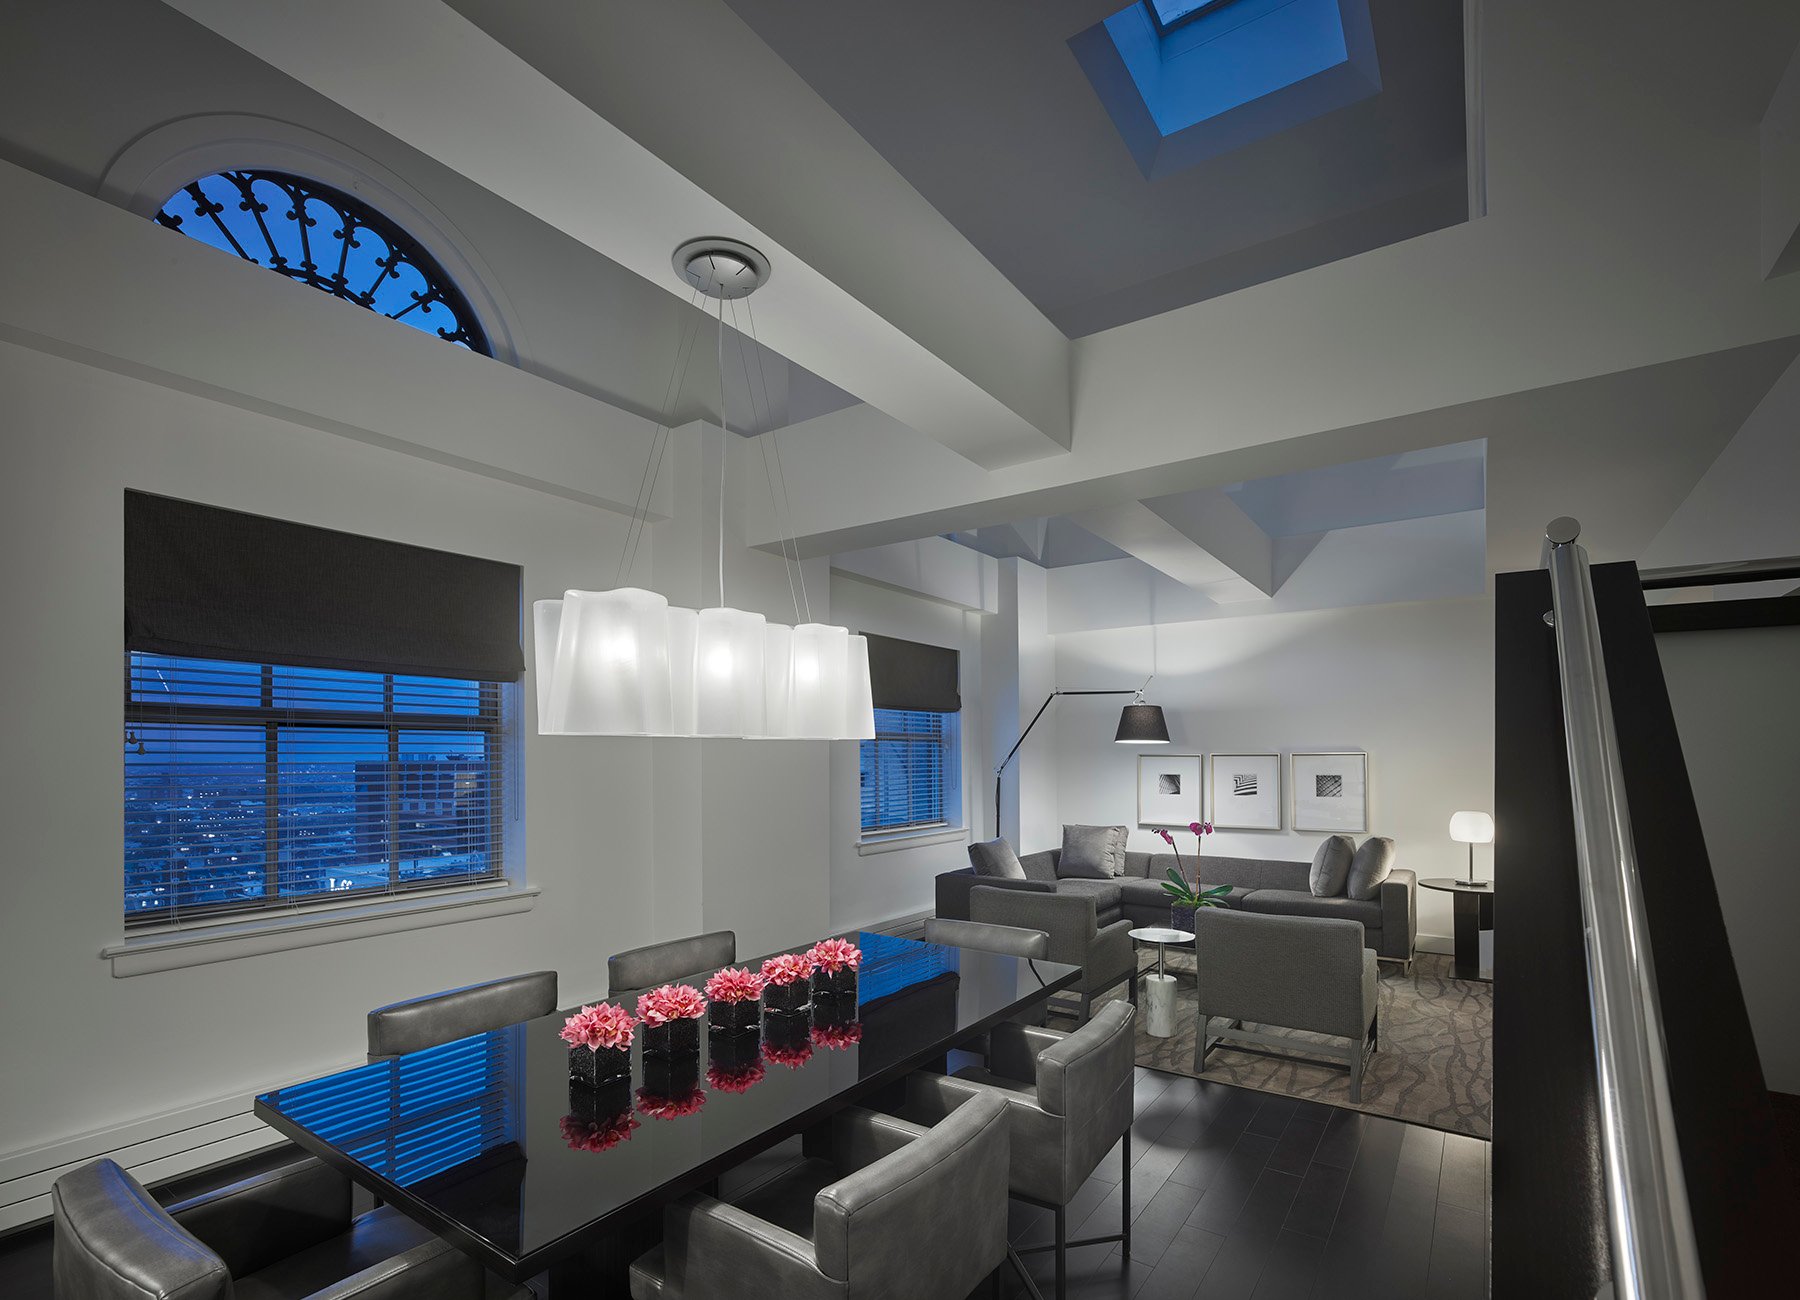 Philadelphia penthouse lounge with modern black and gray dining table for 8, stairs to second level, and arched windows showing dusk sky